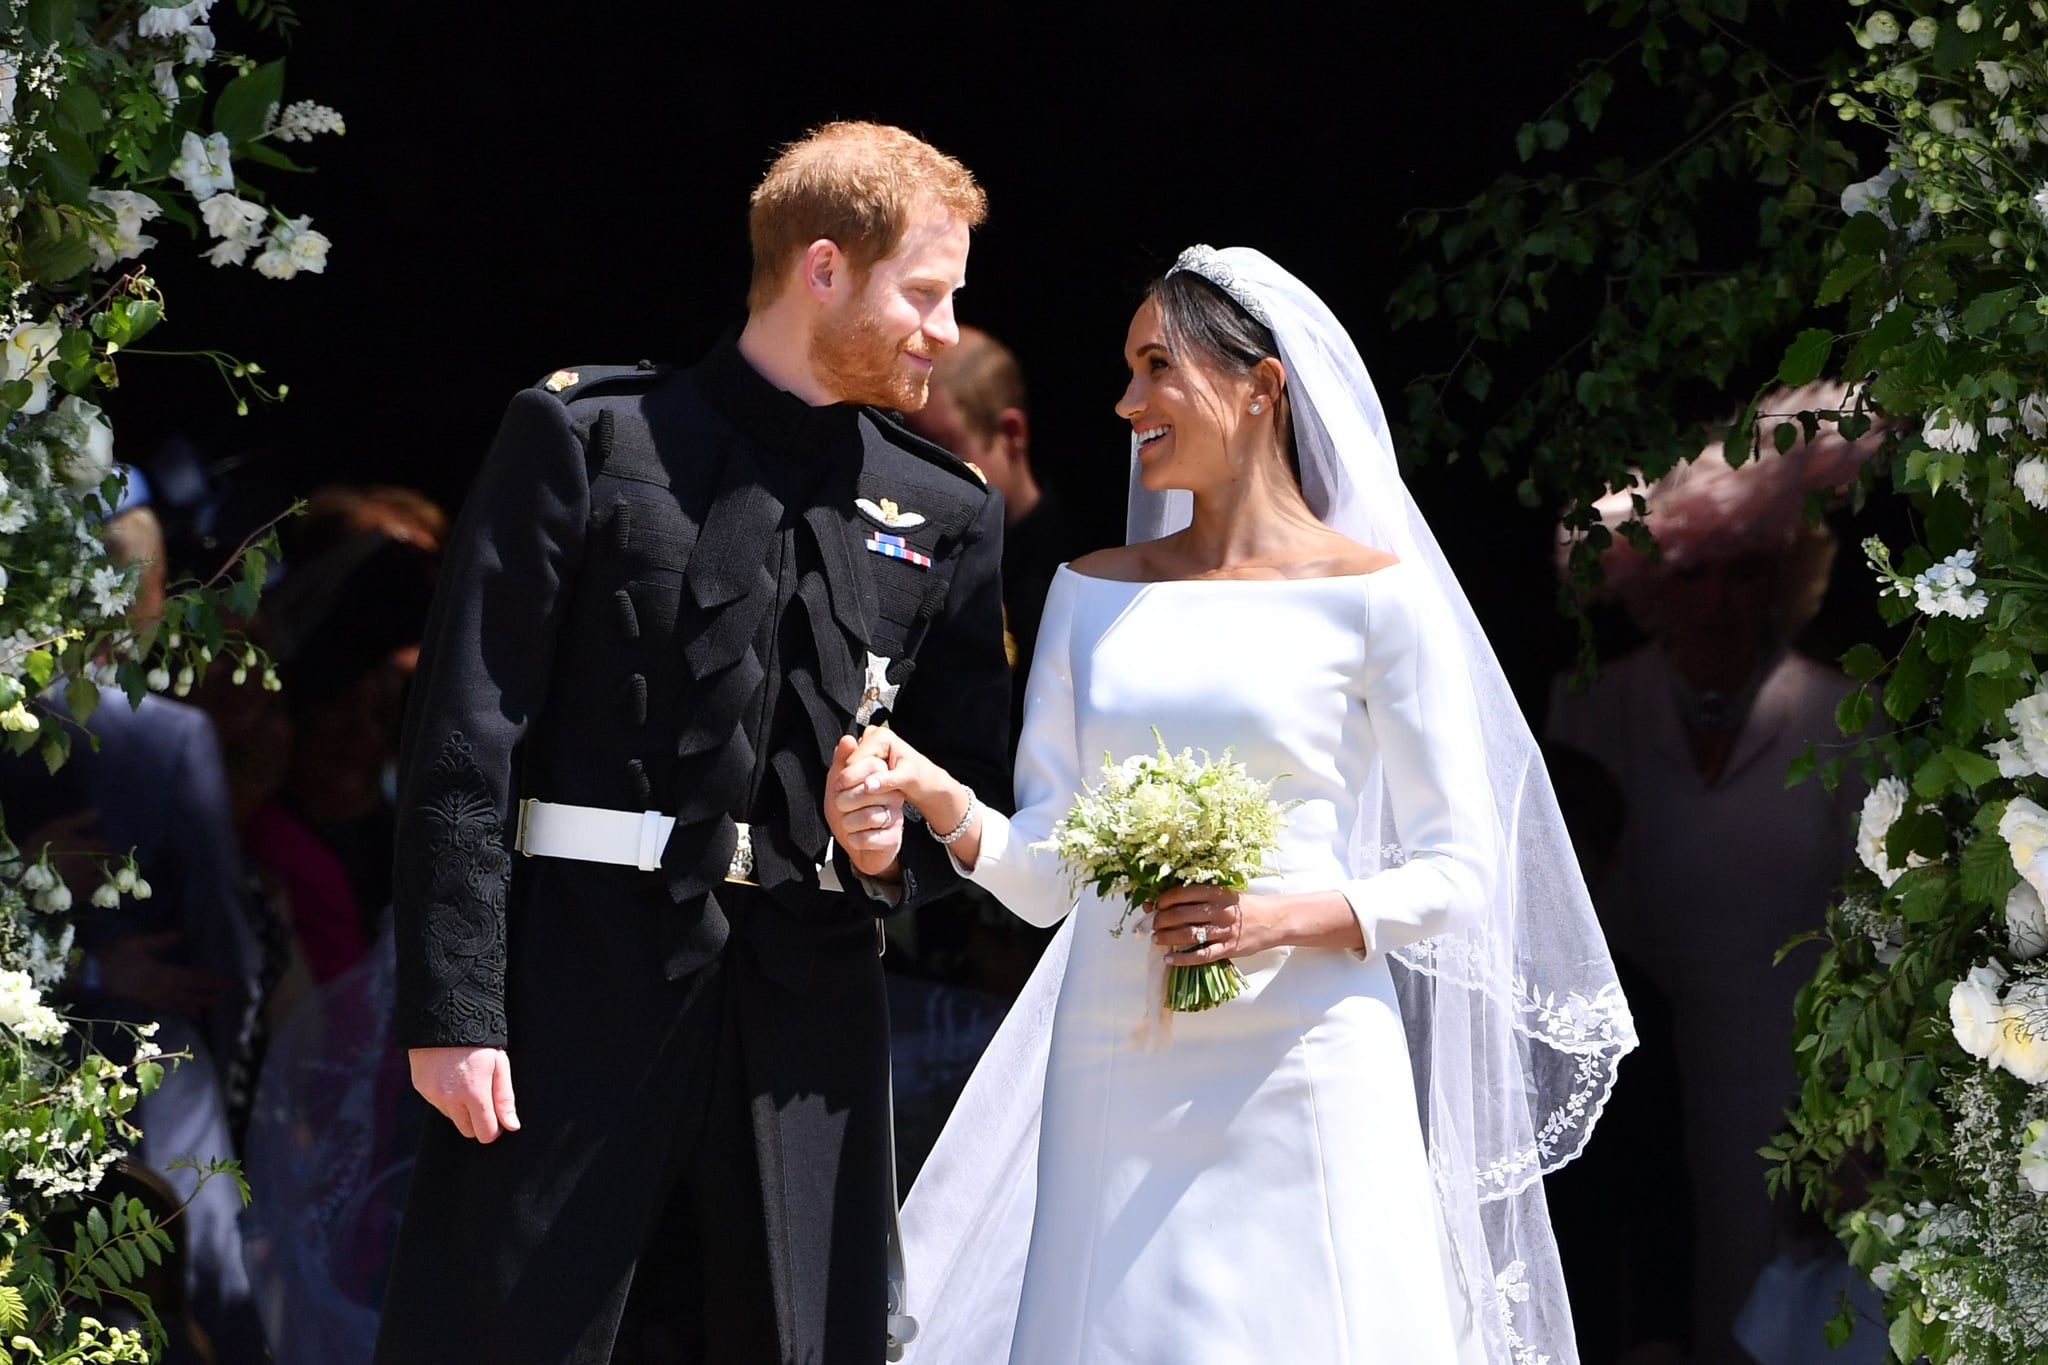 TOPSHOT - Britain's Prince Harry, Duke of Sussex and his wife Meghan, Duchess of Sussex emerge from the West Door of St George's Chapel, Windsor Castle, in Windsor, on May 19, 2018 after their wedding ceremony. (Photo by Ben STANSALL / various sources / AFP)        (Photo credit should read BEN STANSALL/AFP/Getty Images)